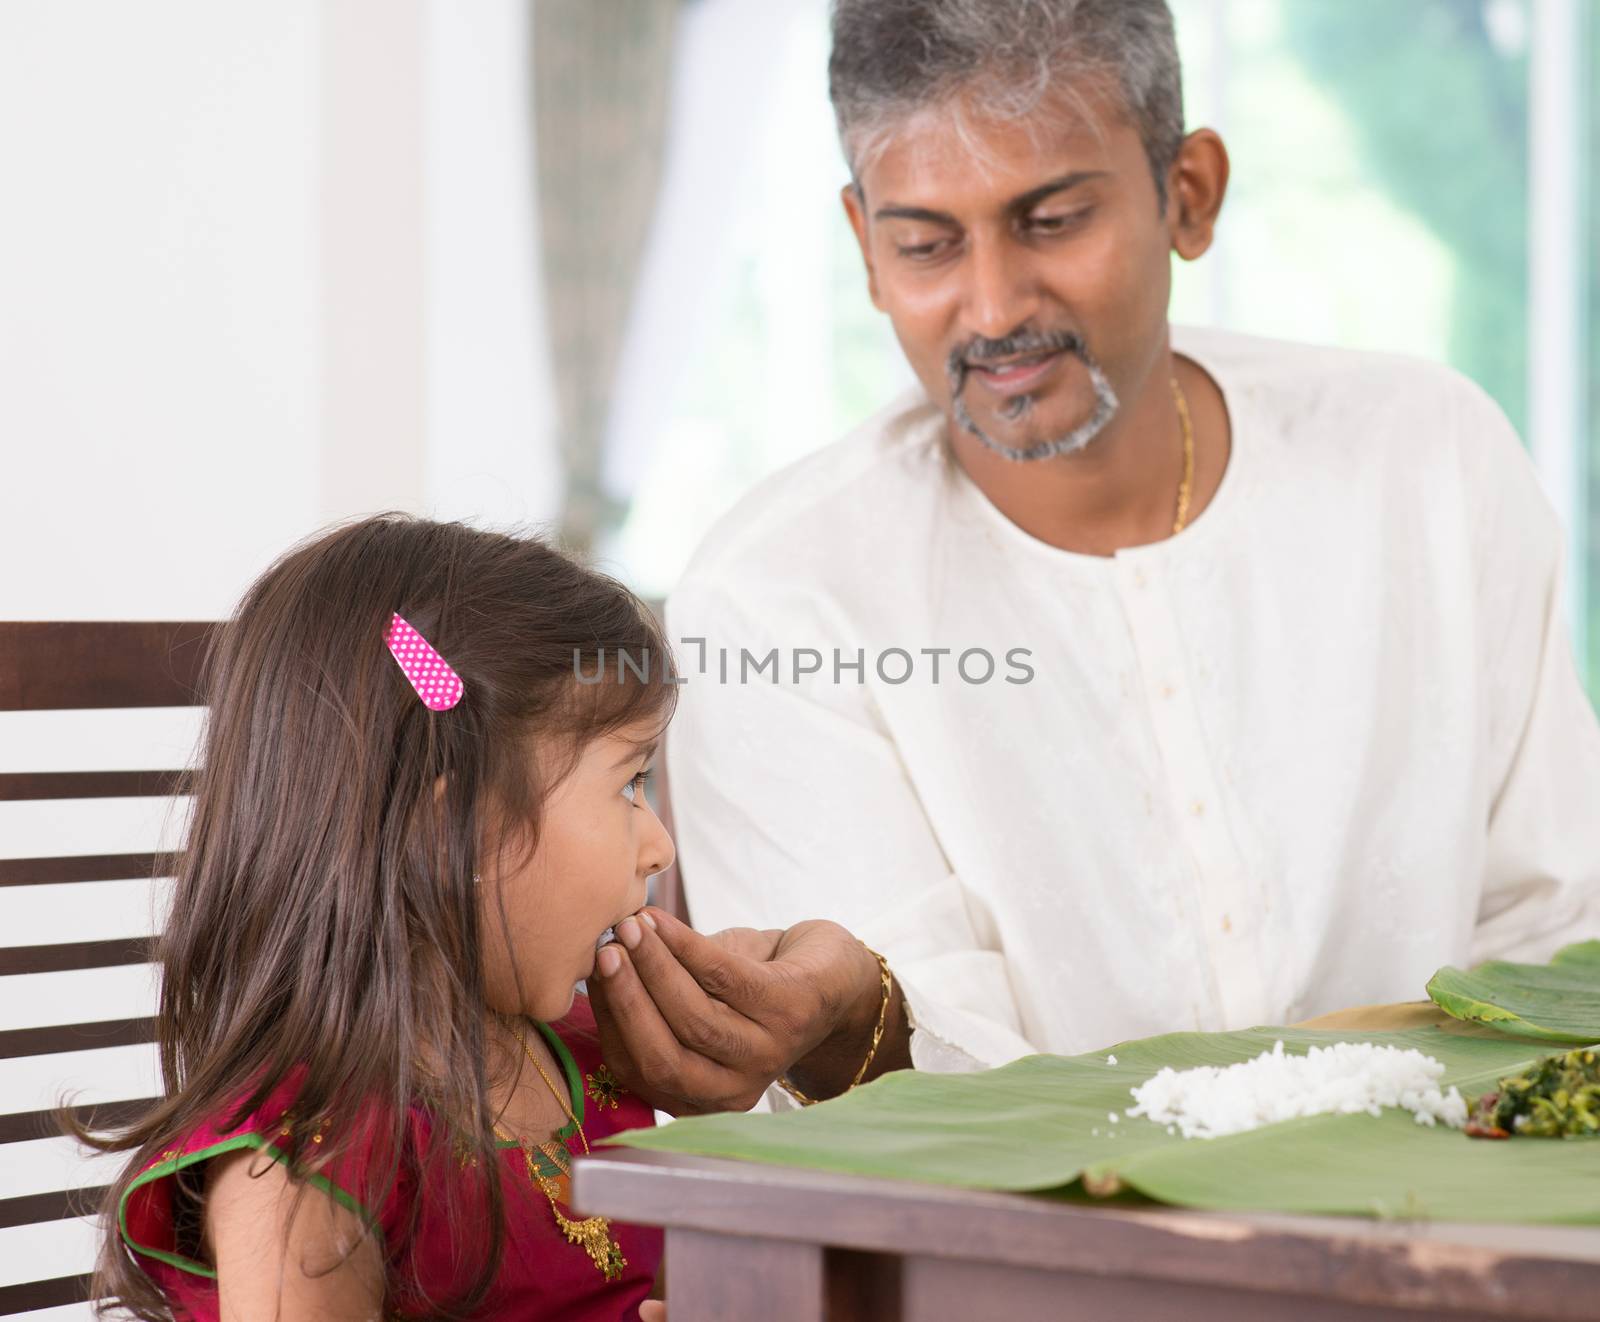 Indian family dining at home. Candid photo of India people eating rice with hands. Parent feeding child.